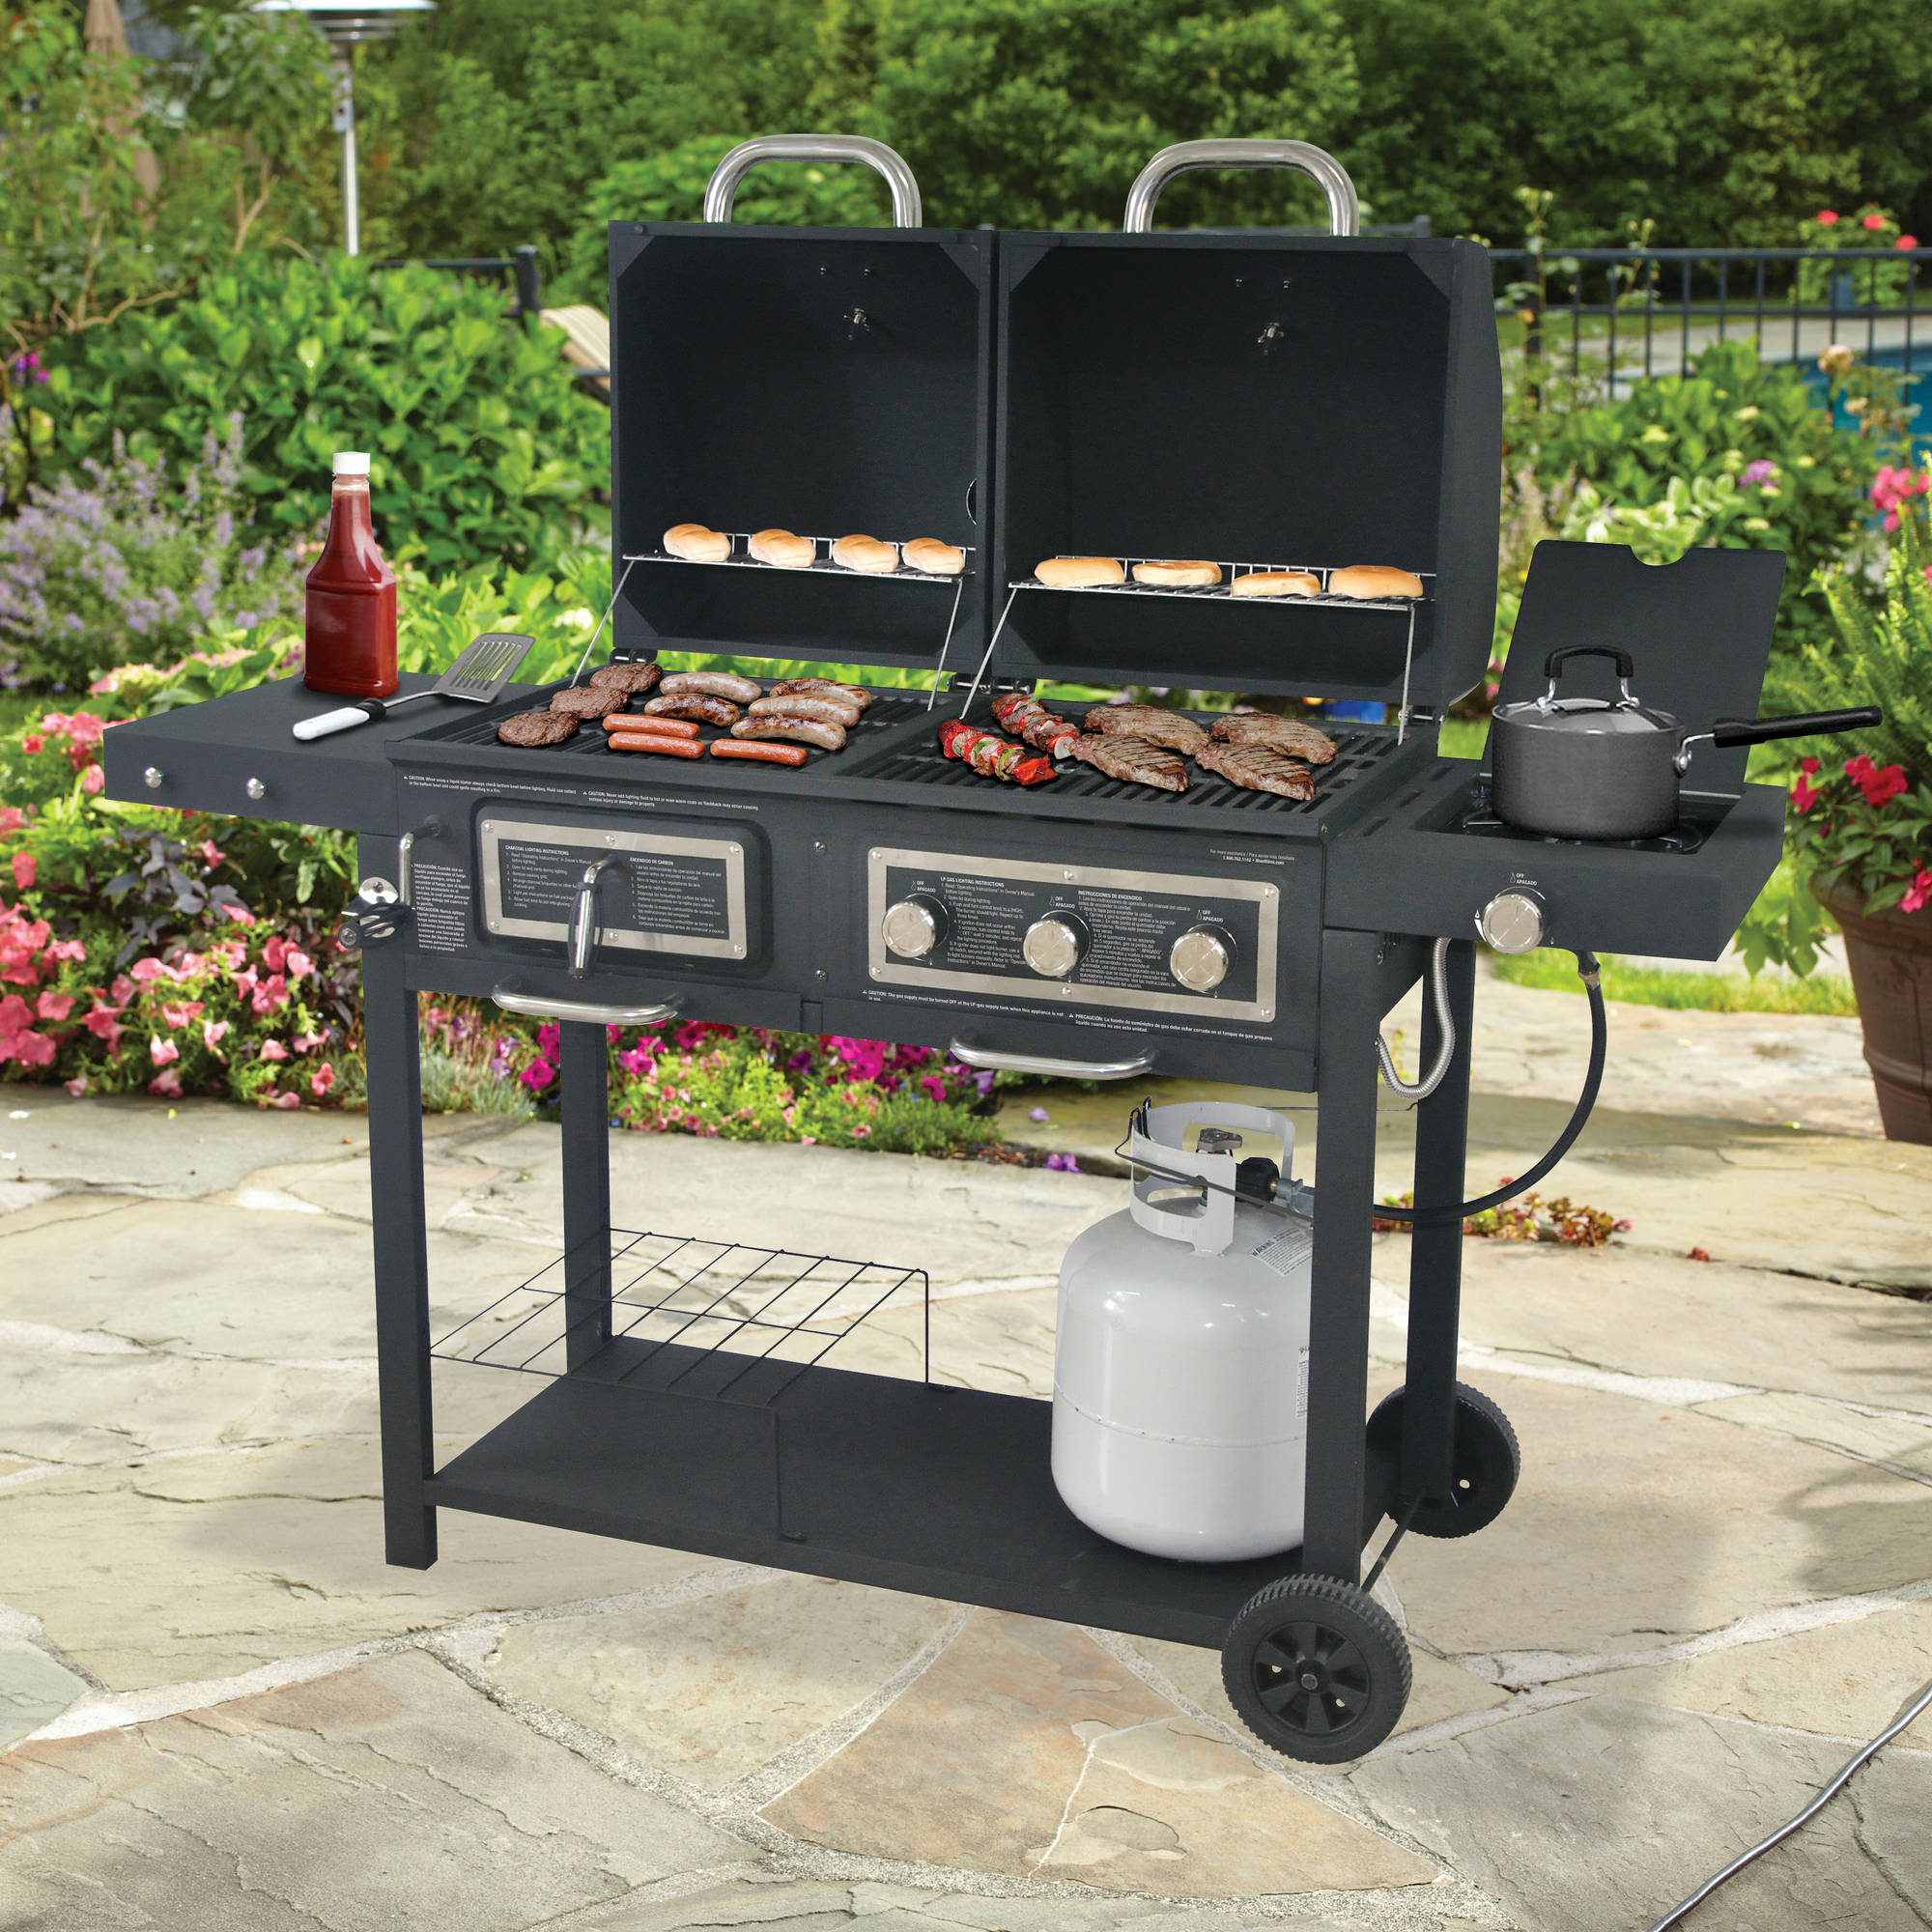 667-sq in Gas/Charcoal Grill - image 3 of 4